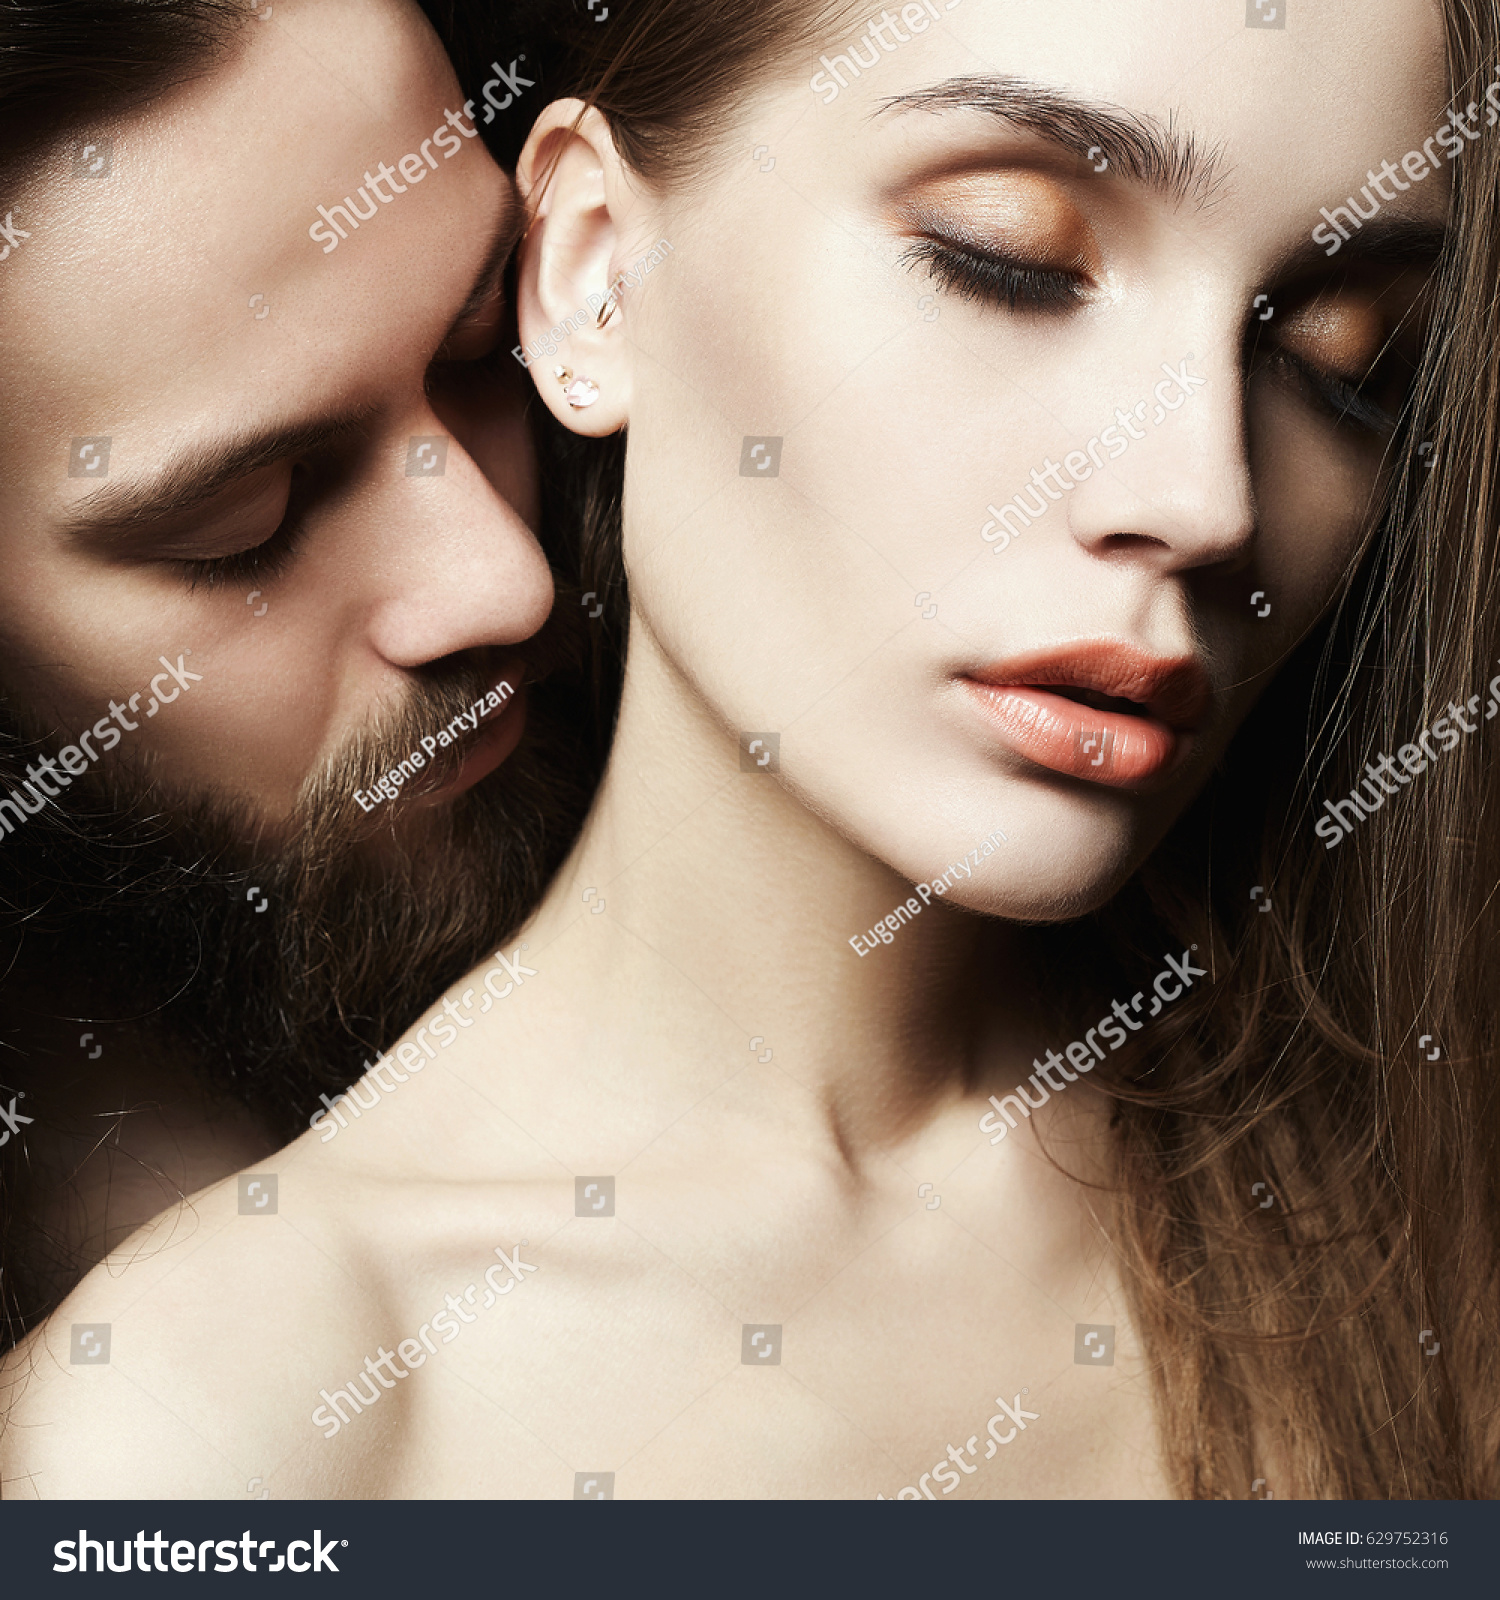 Beautiful Couple Kisssexy Woman Handsome Manlovely Stock Photo (Edit.